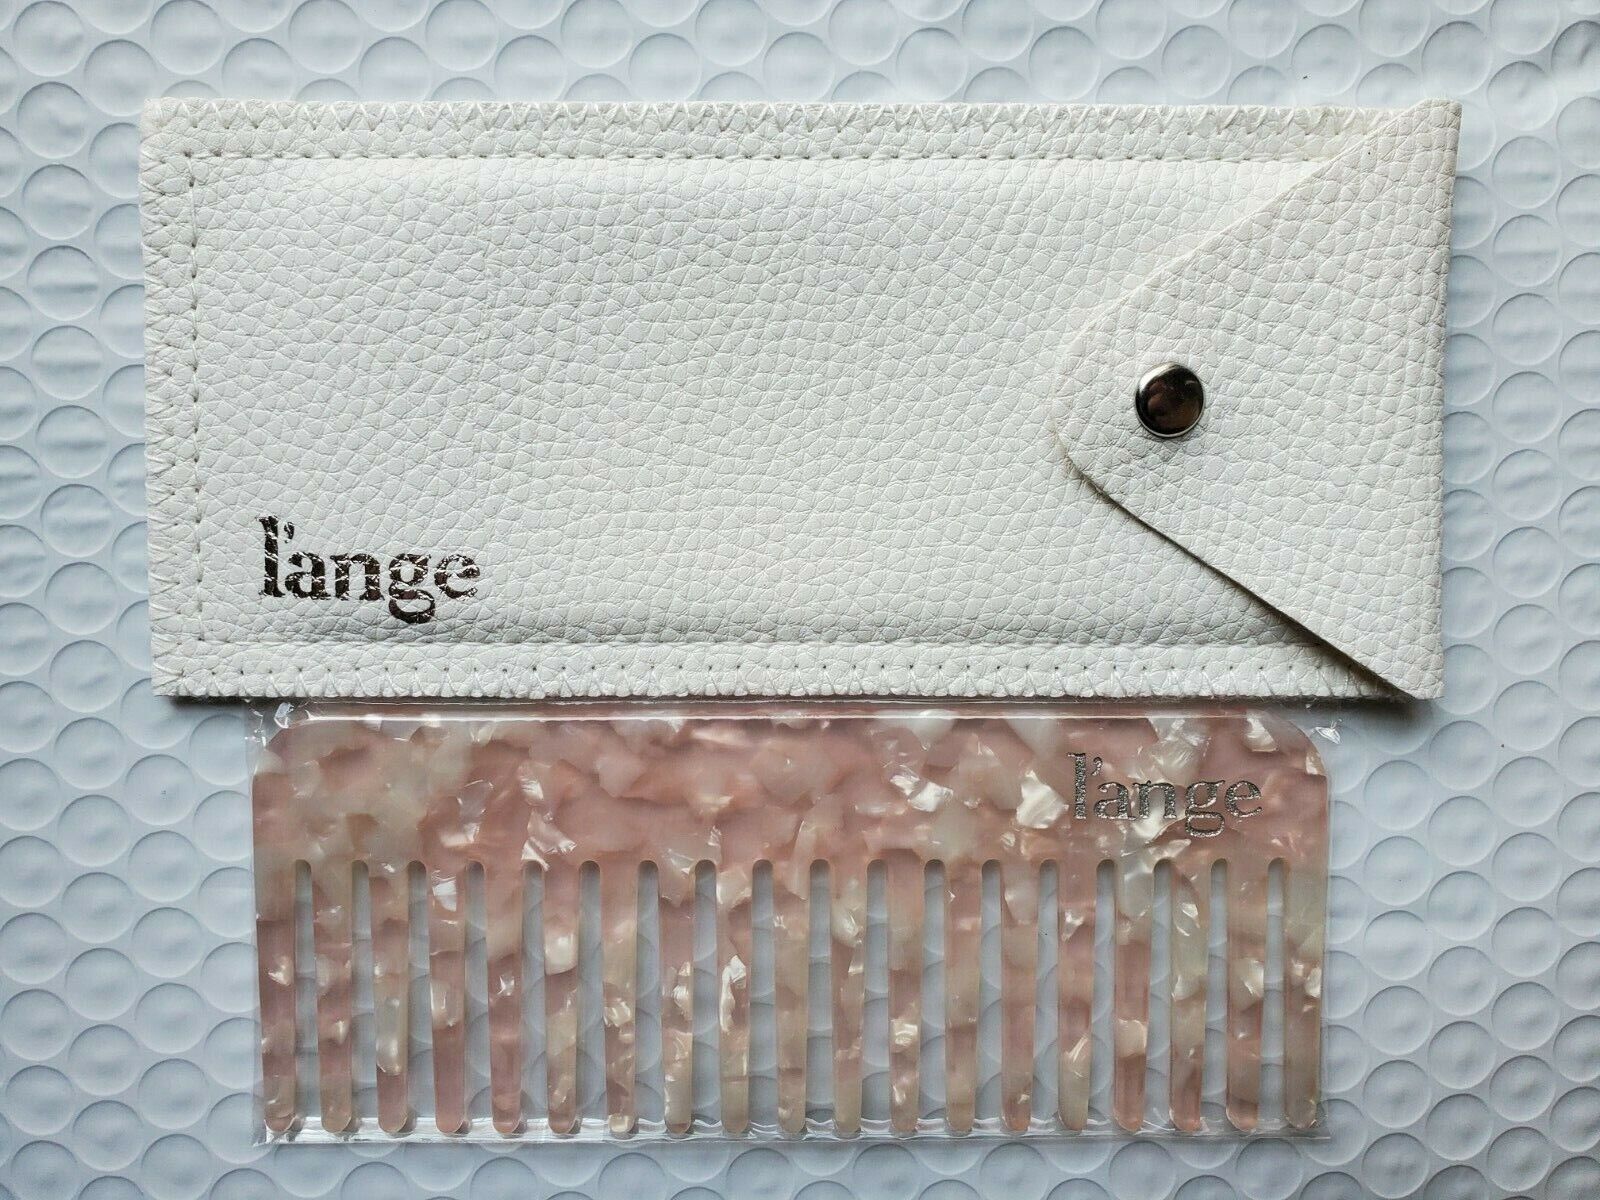 Lange L'ange Wide Tooth Comb - Blush Acetate - Includes Case - NEW // SEALED